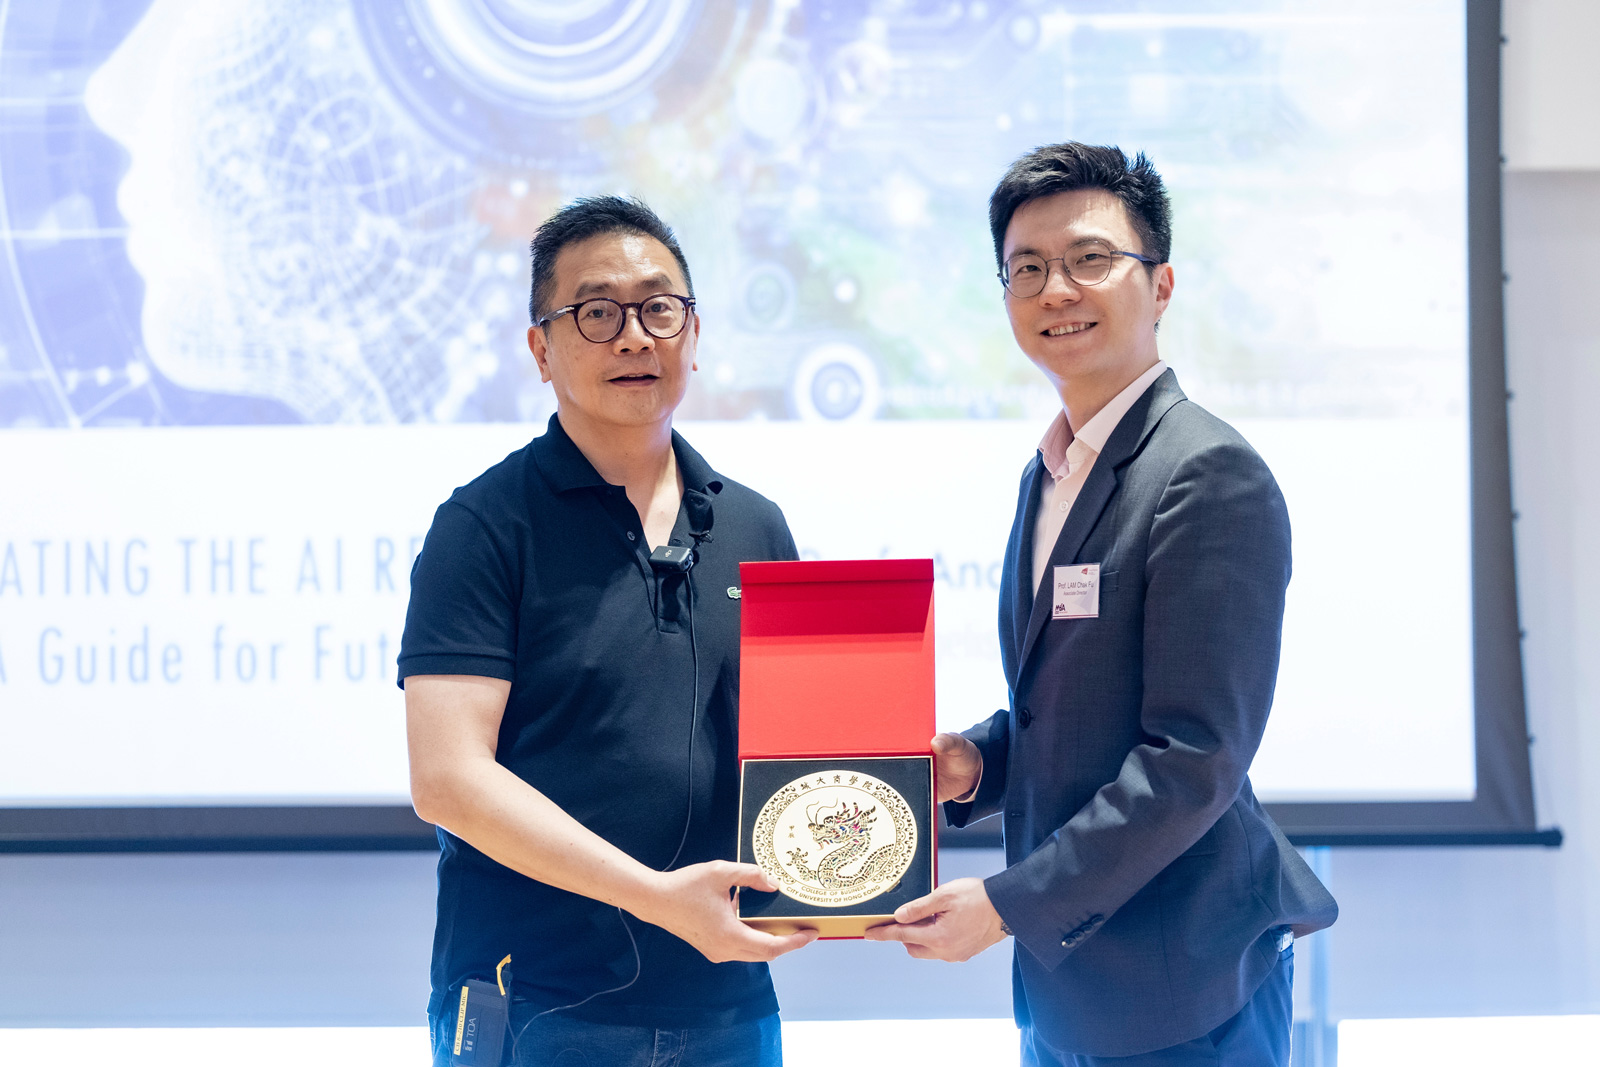 MBA Associate Director Professor Chak-fu Lam presents a token of appreciation to thank Professor Andy Chun for his support